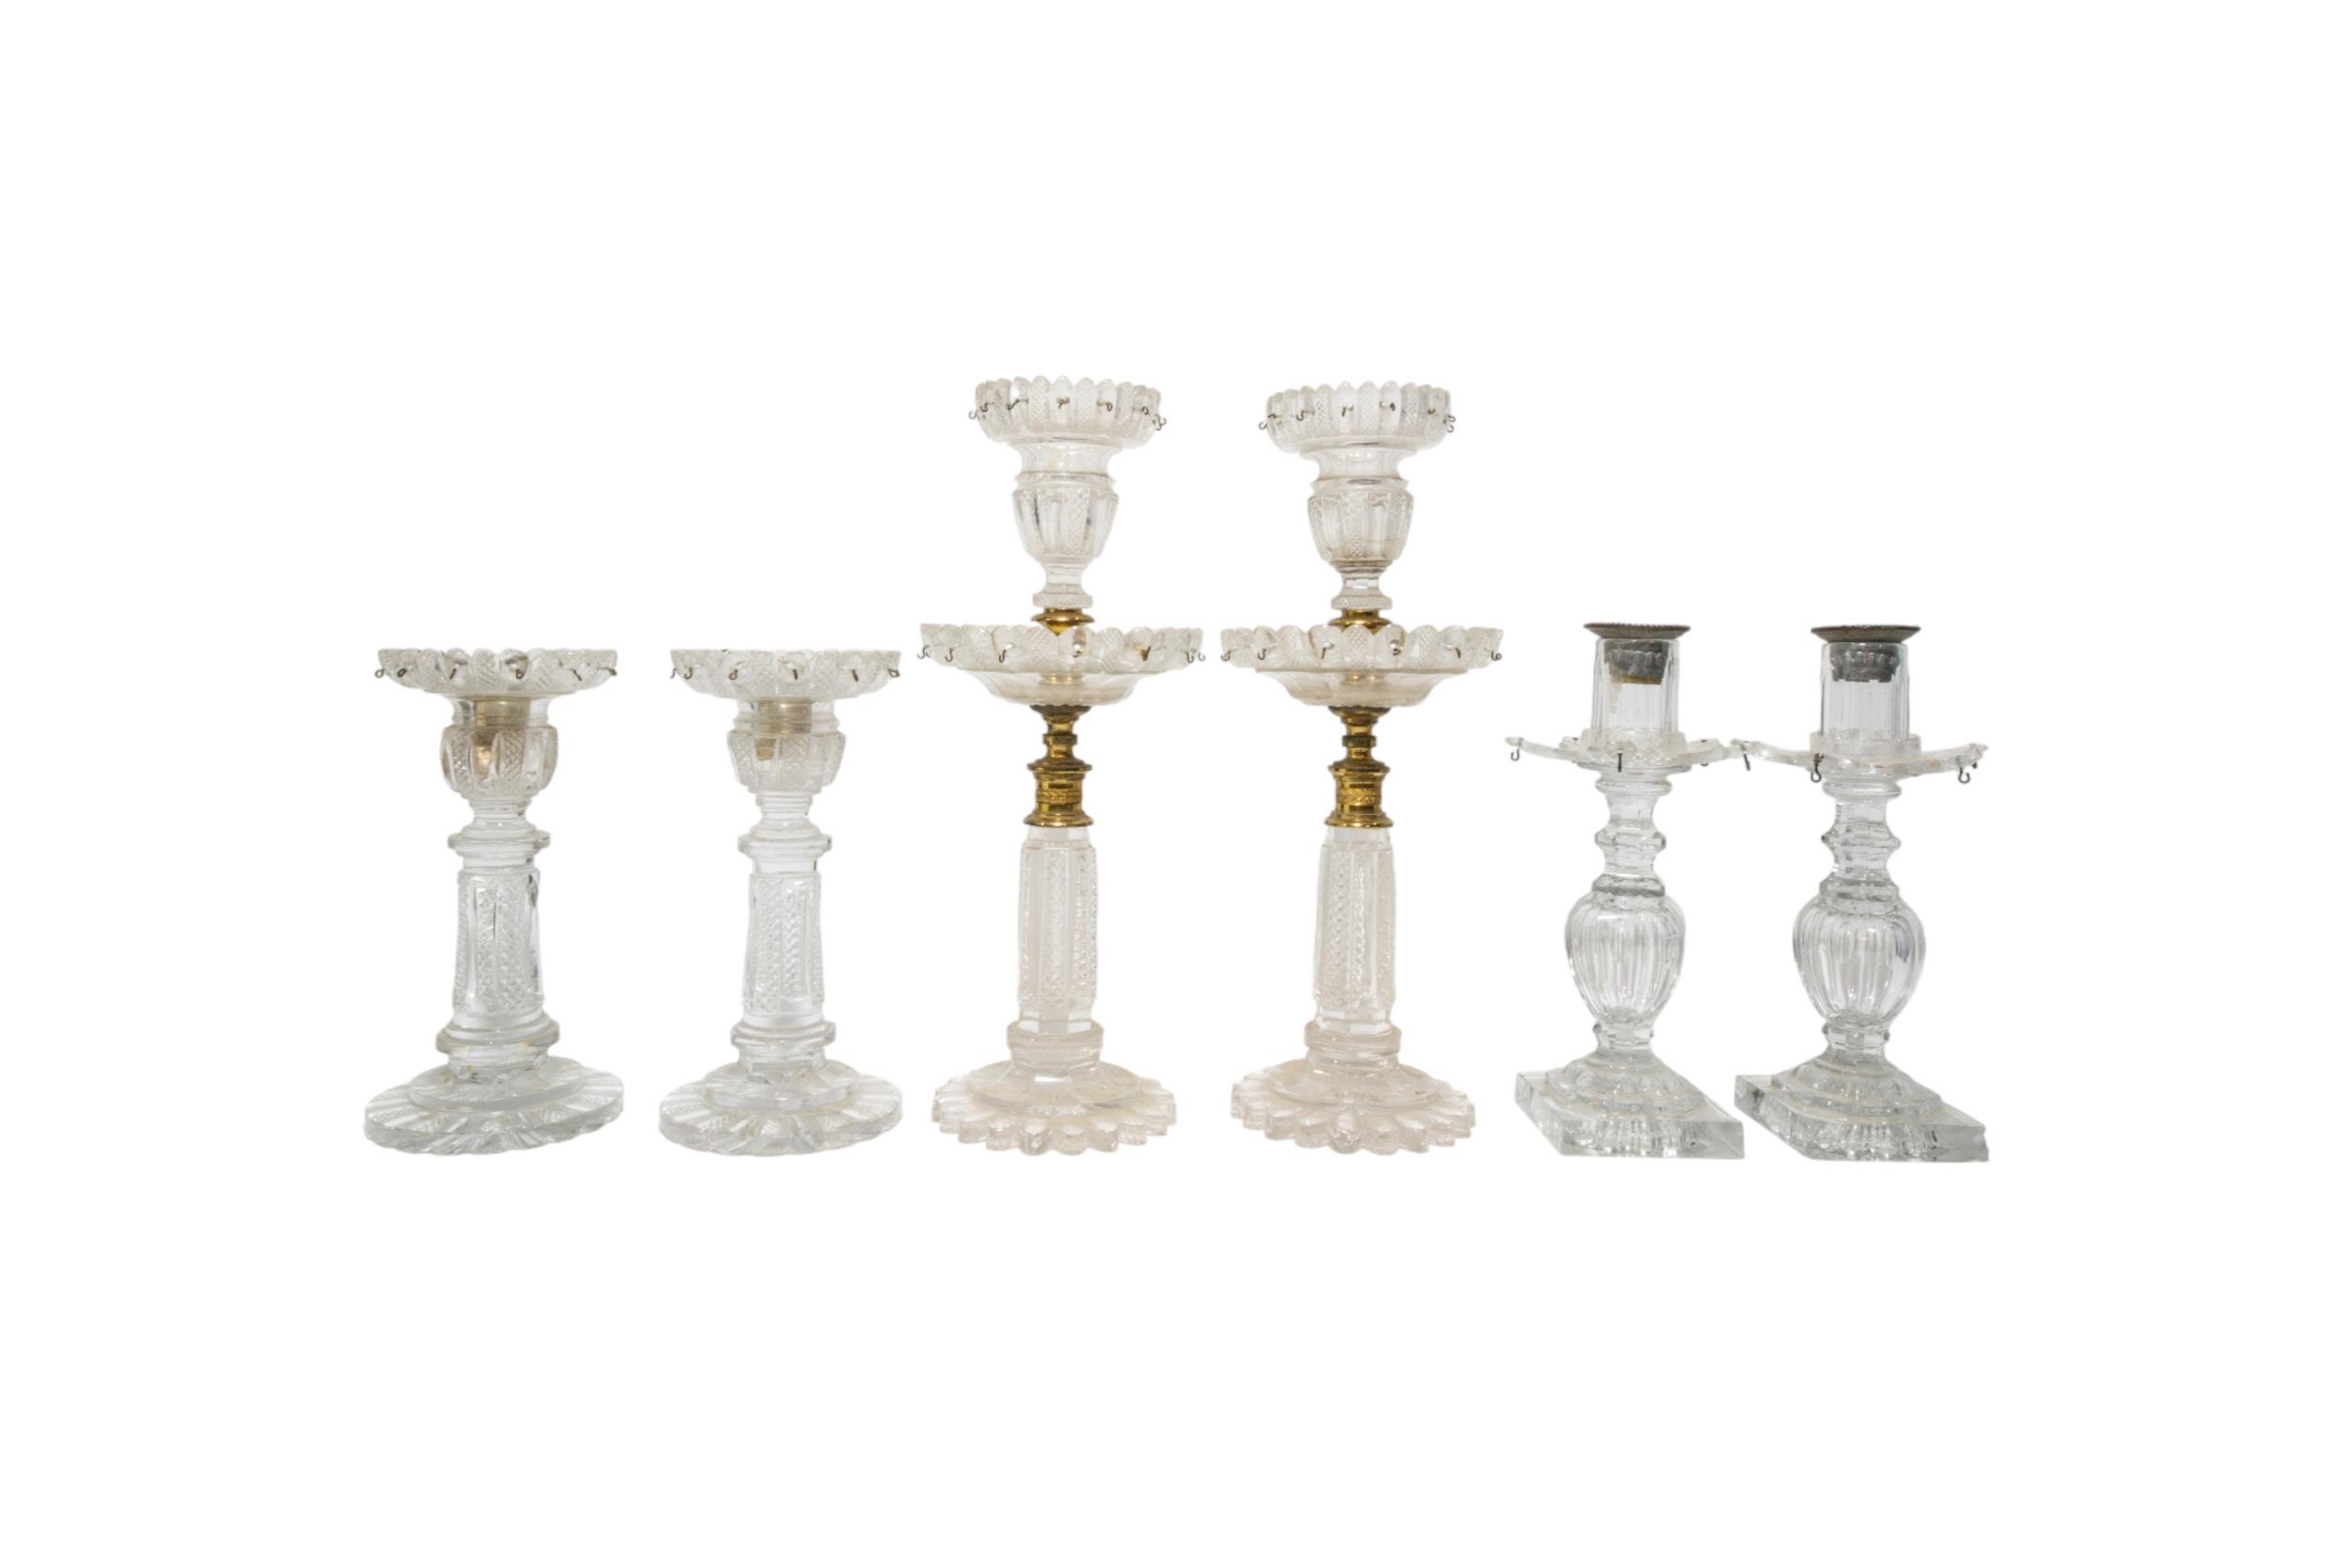 FOUR PAIRS OF 19TH CENTURY CUT GLASS LUSTRES, along with a faceted glass 'perch' stand and another